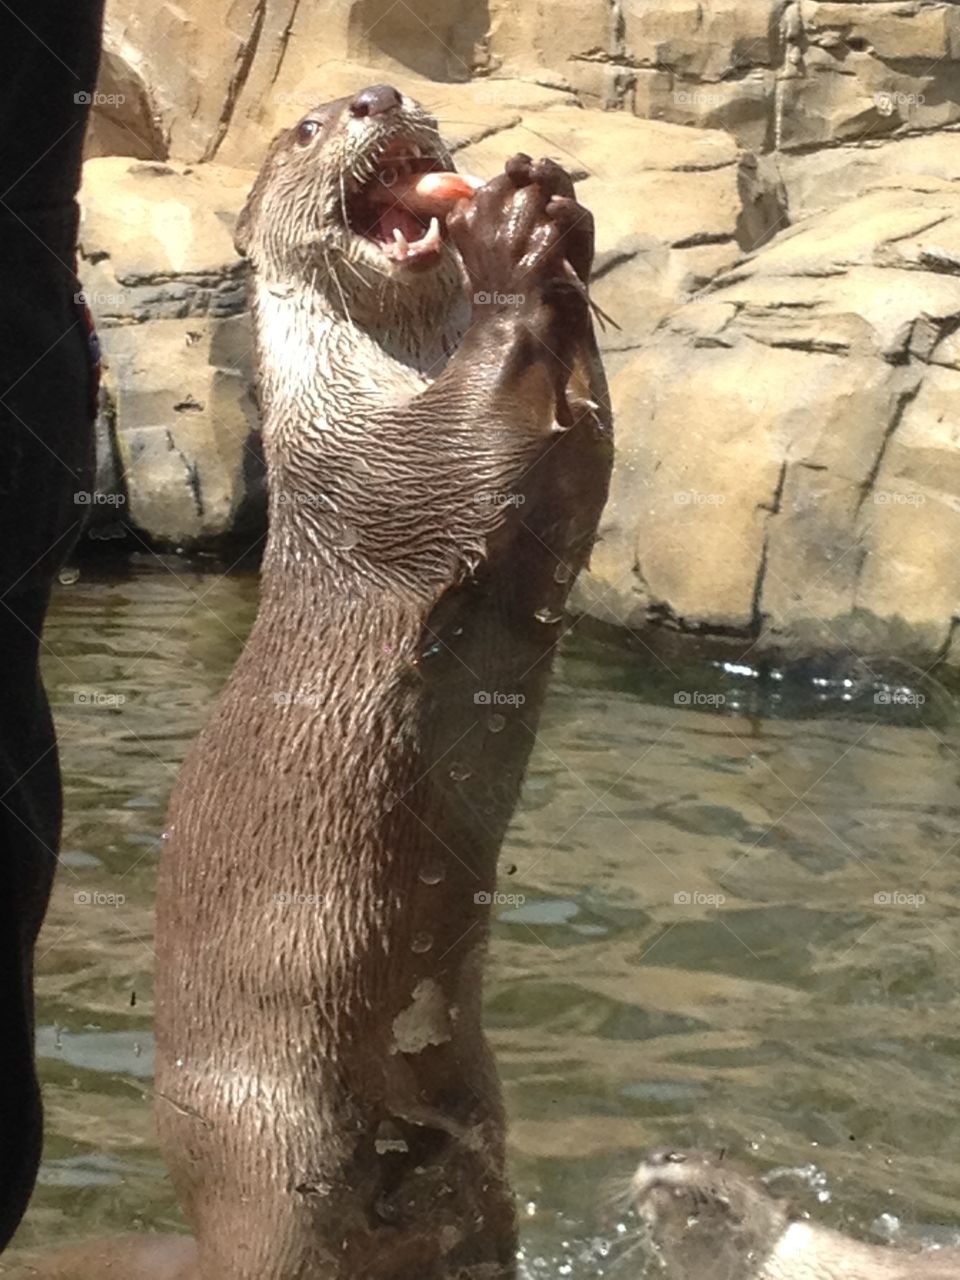 An otter enjoying its lunch at the zoo